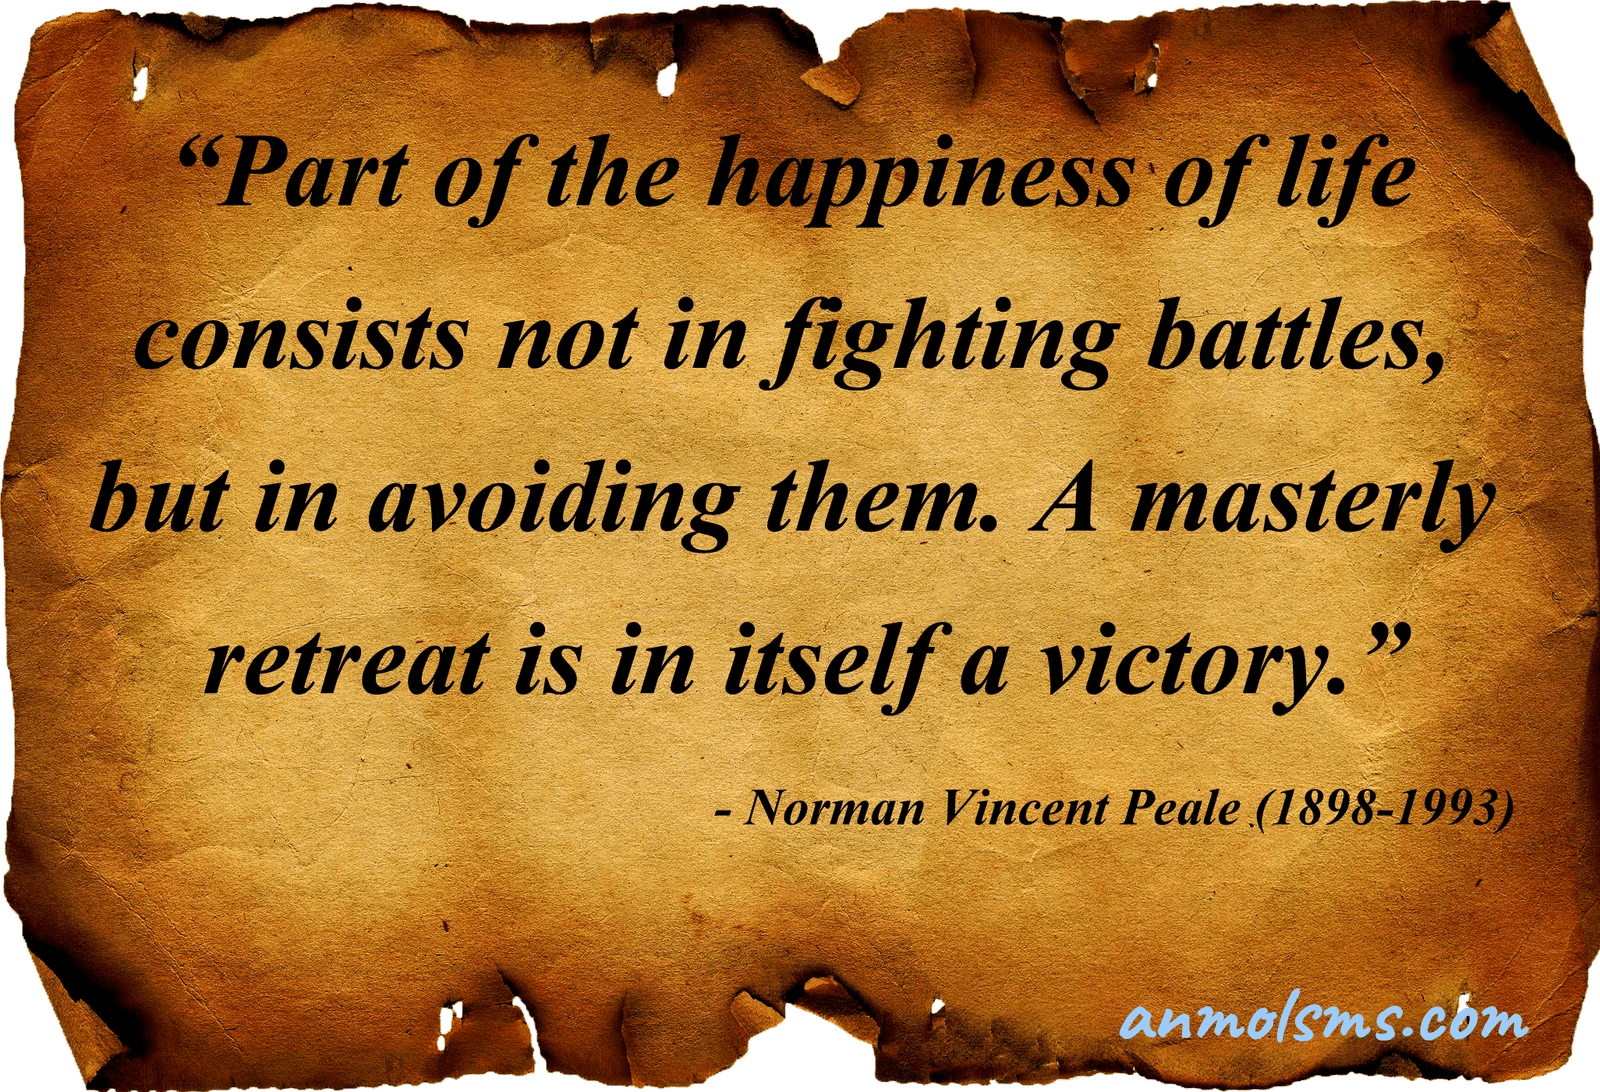 Part of the happiness of life consists not in fighting battles, but in avoiding them. A masterly retreat is in itself a victory.‐ Norman Vincent Peale (1898-1993)